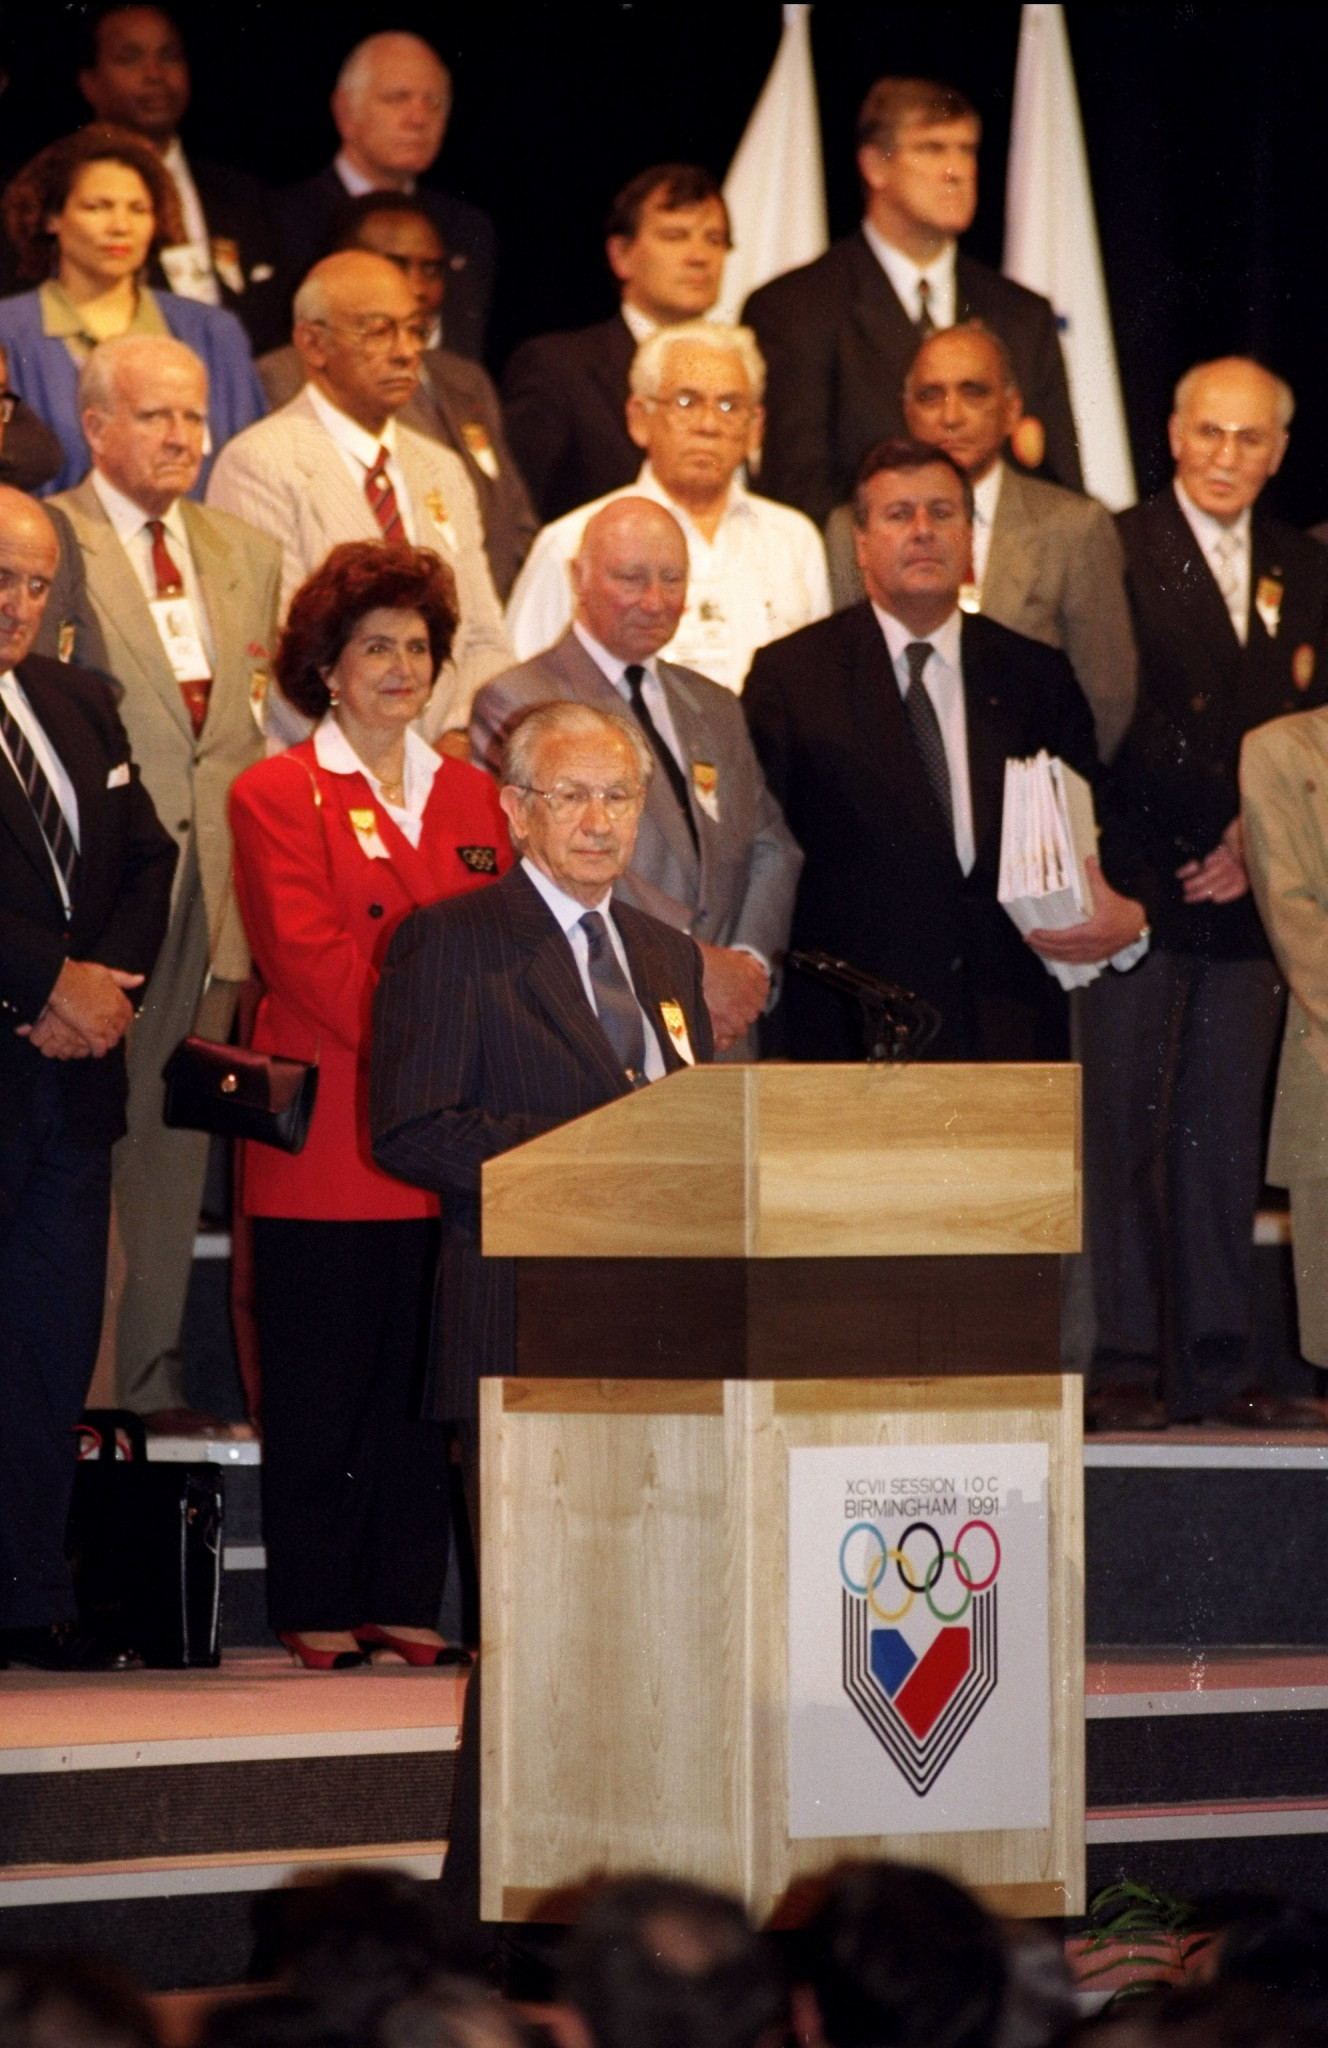 Birmingham hosted the 97th IOC Session in 1991 which saw a number of key decisions taken under its then President Juan Antonio Samarnch ©Getty Images